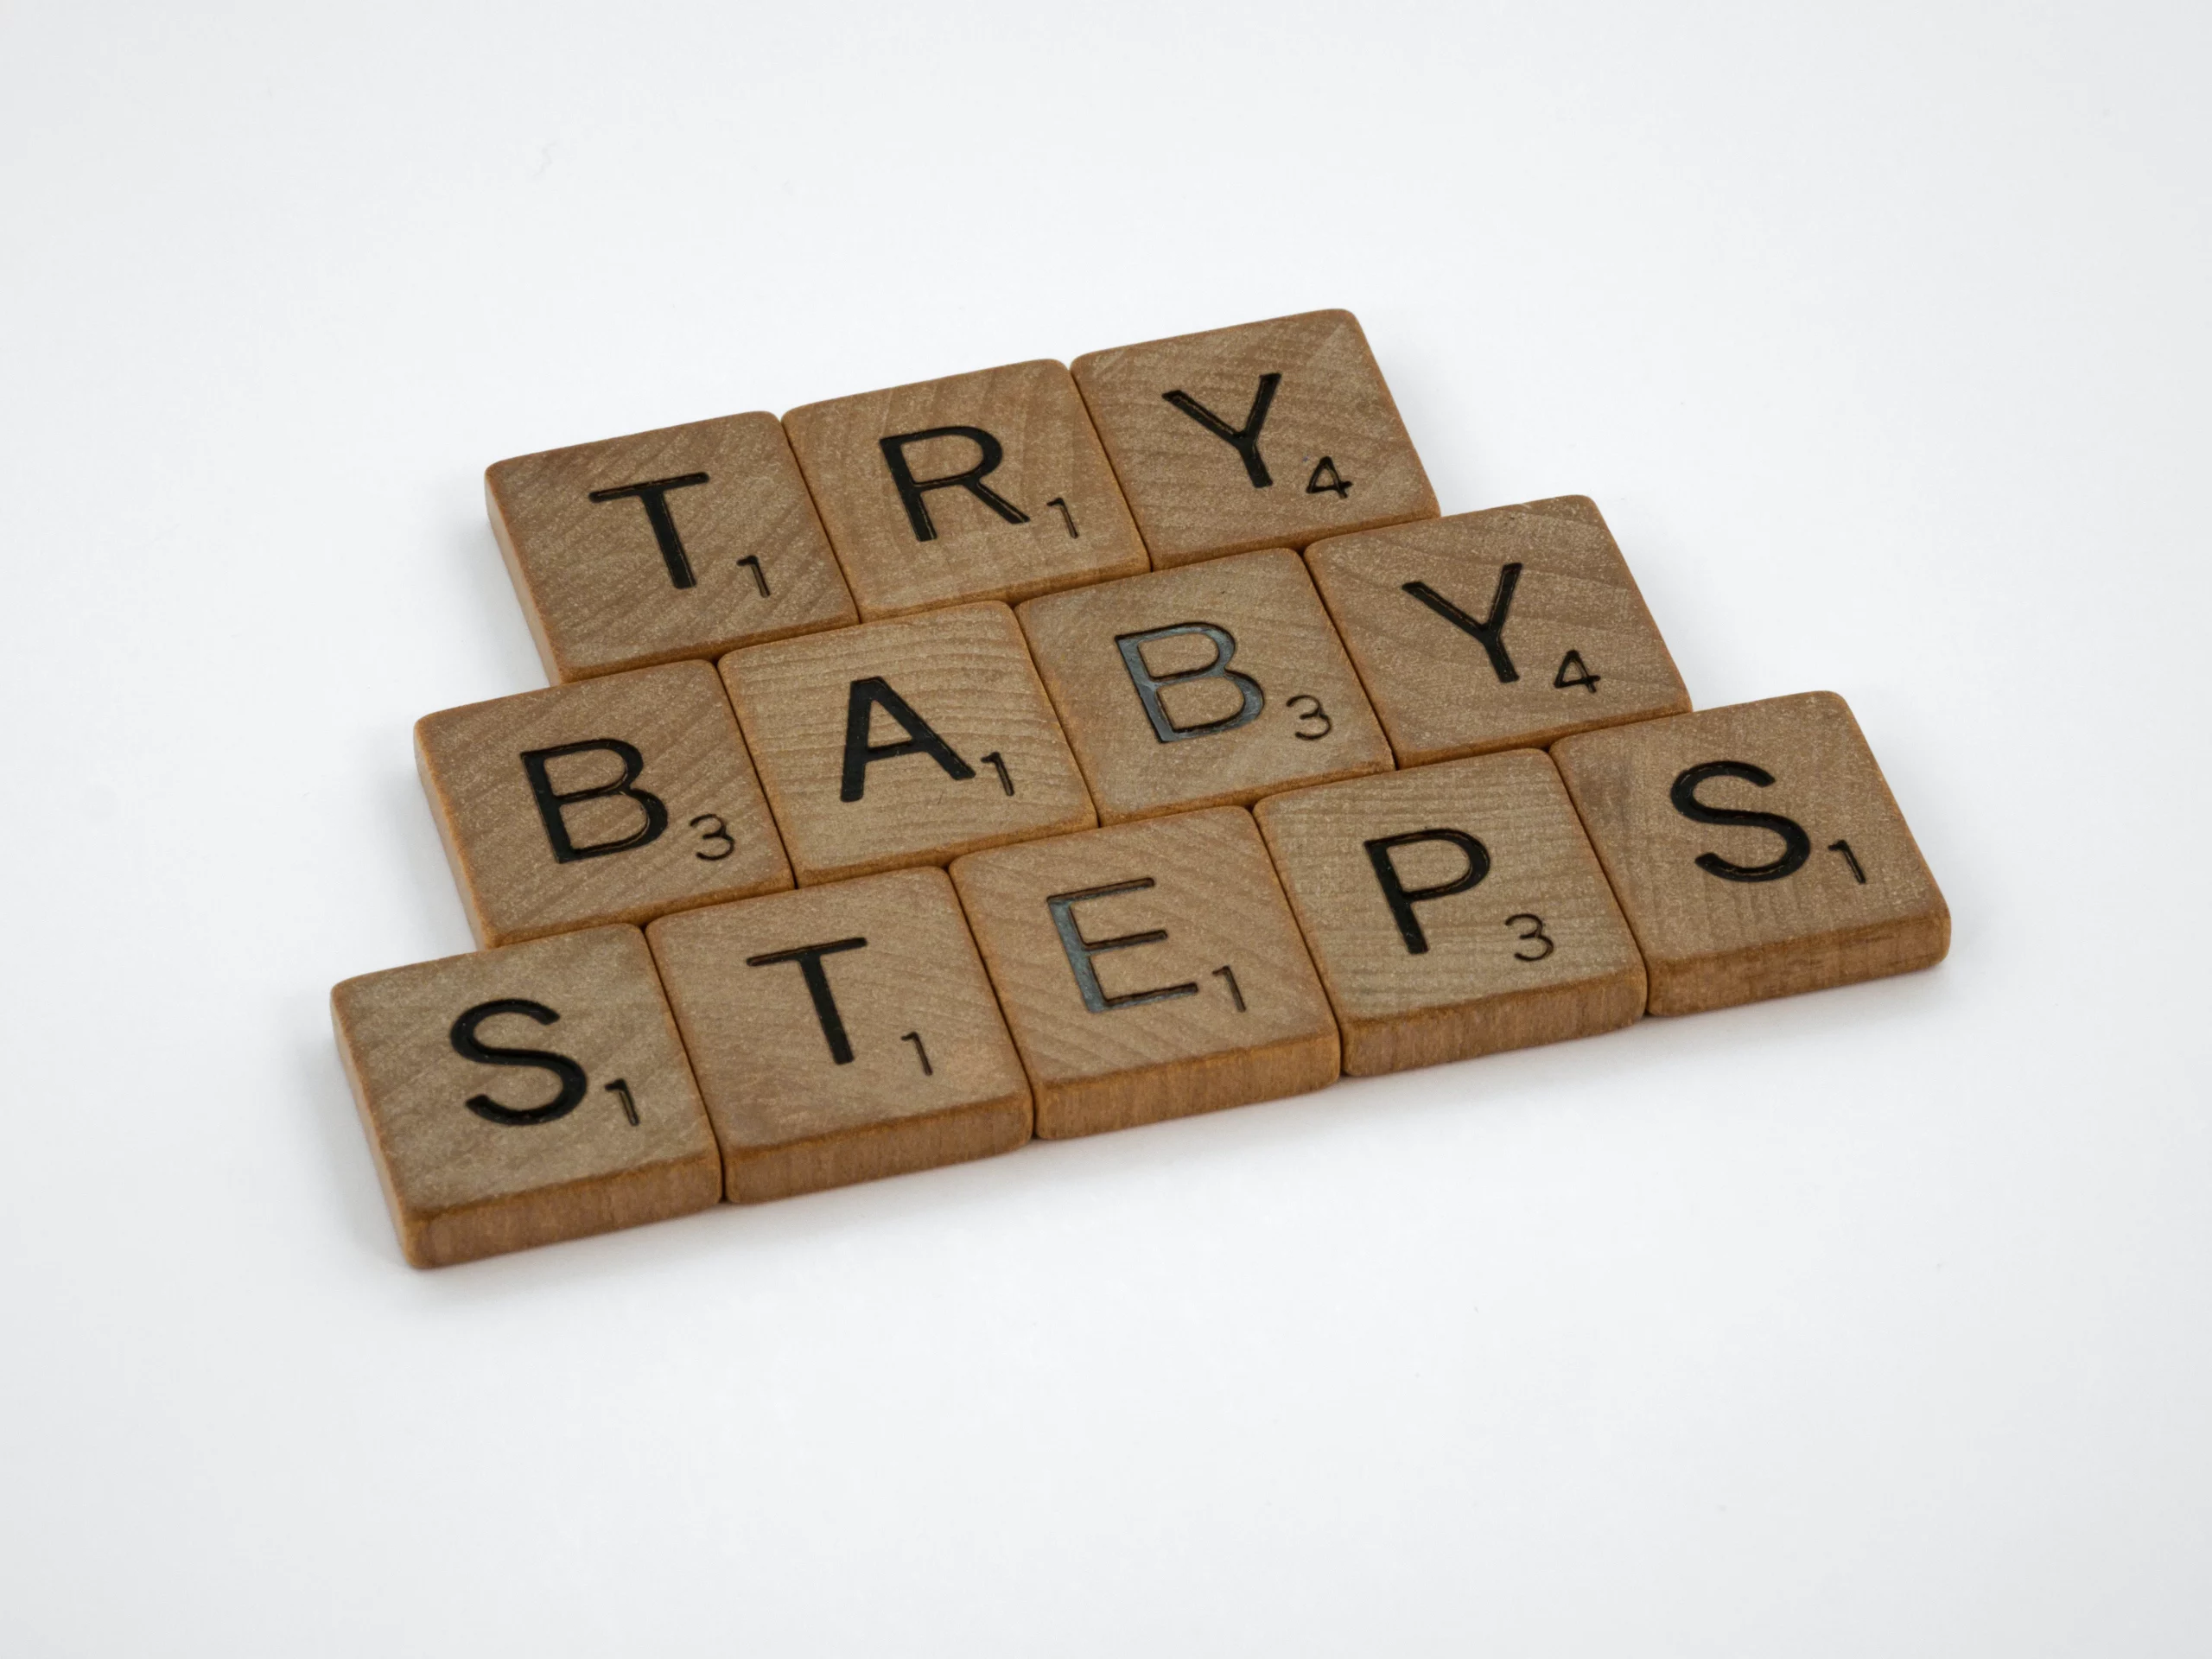 How to encourage independent play: try baby steps